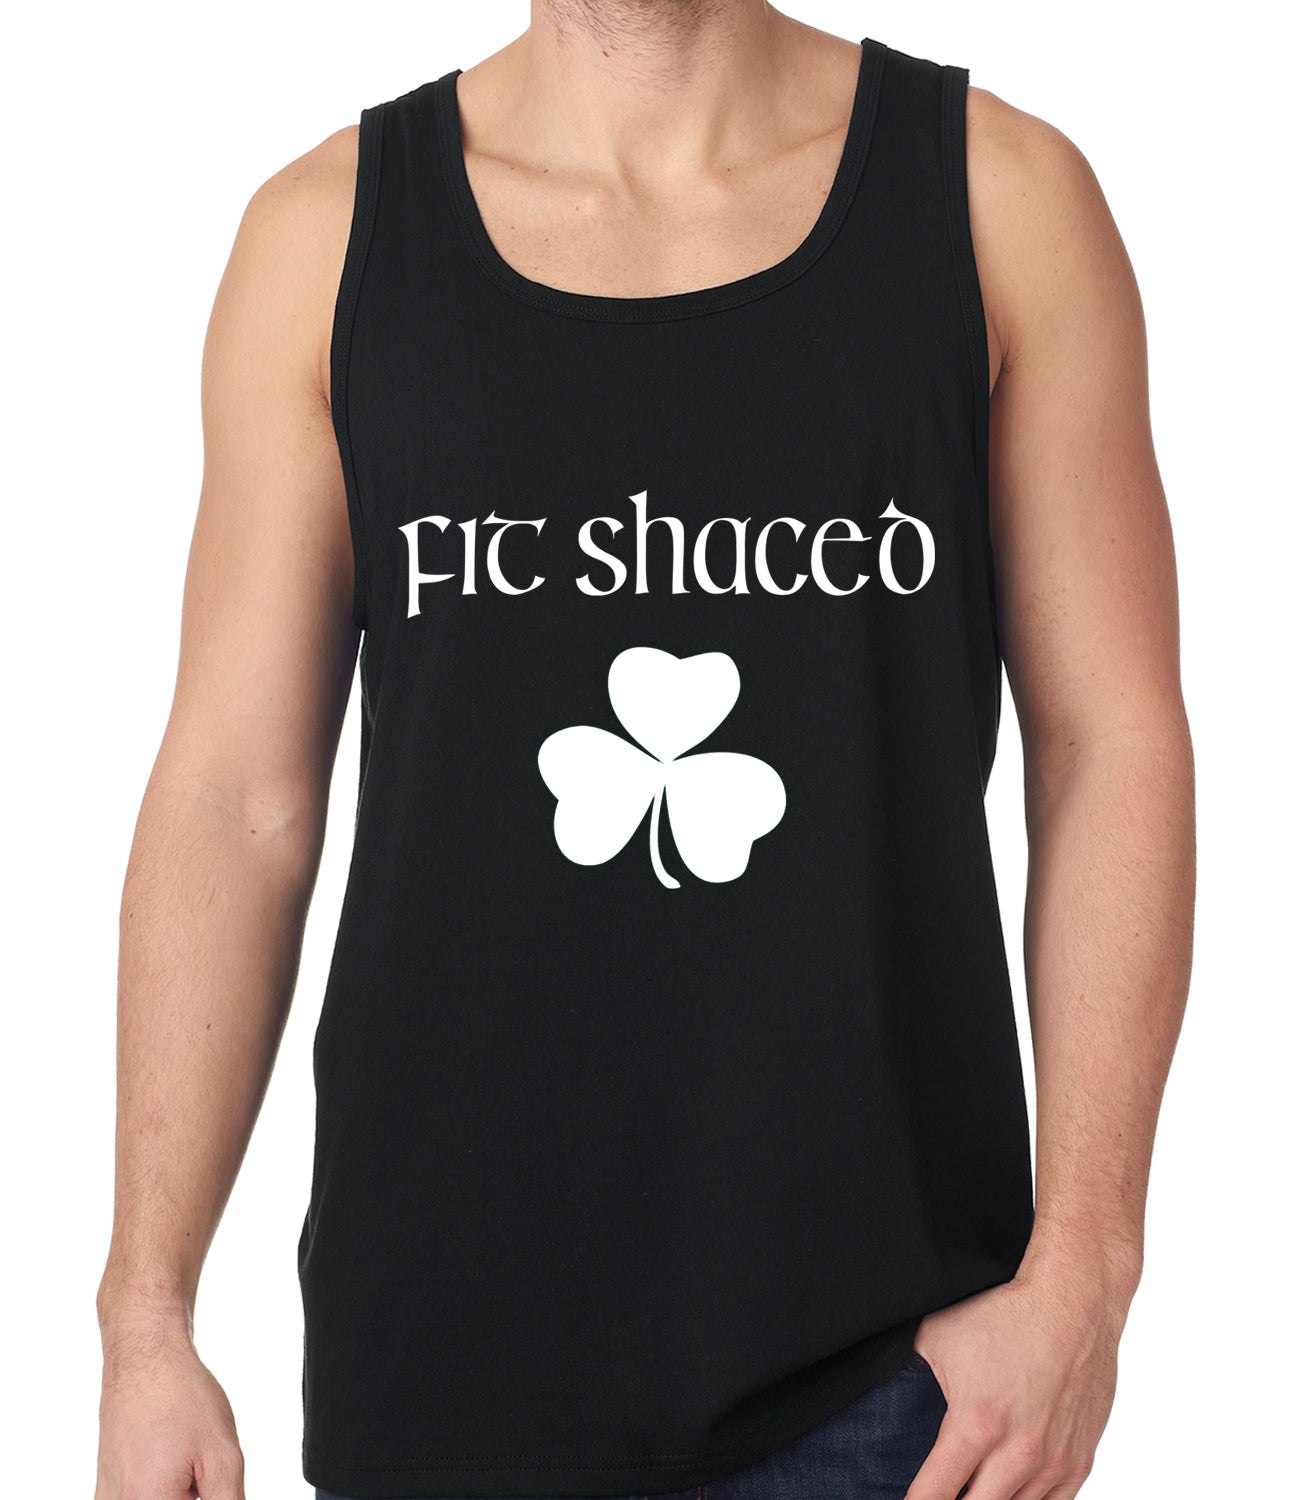 Fit Shaced (Shit Faced) St. Patricks Day Shamrock Drinking Tank Top